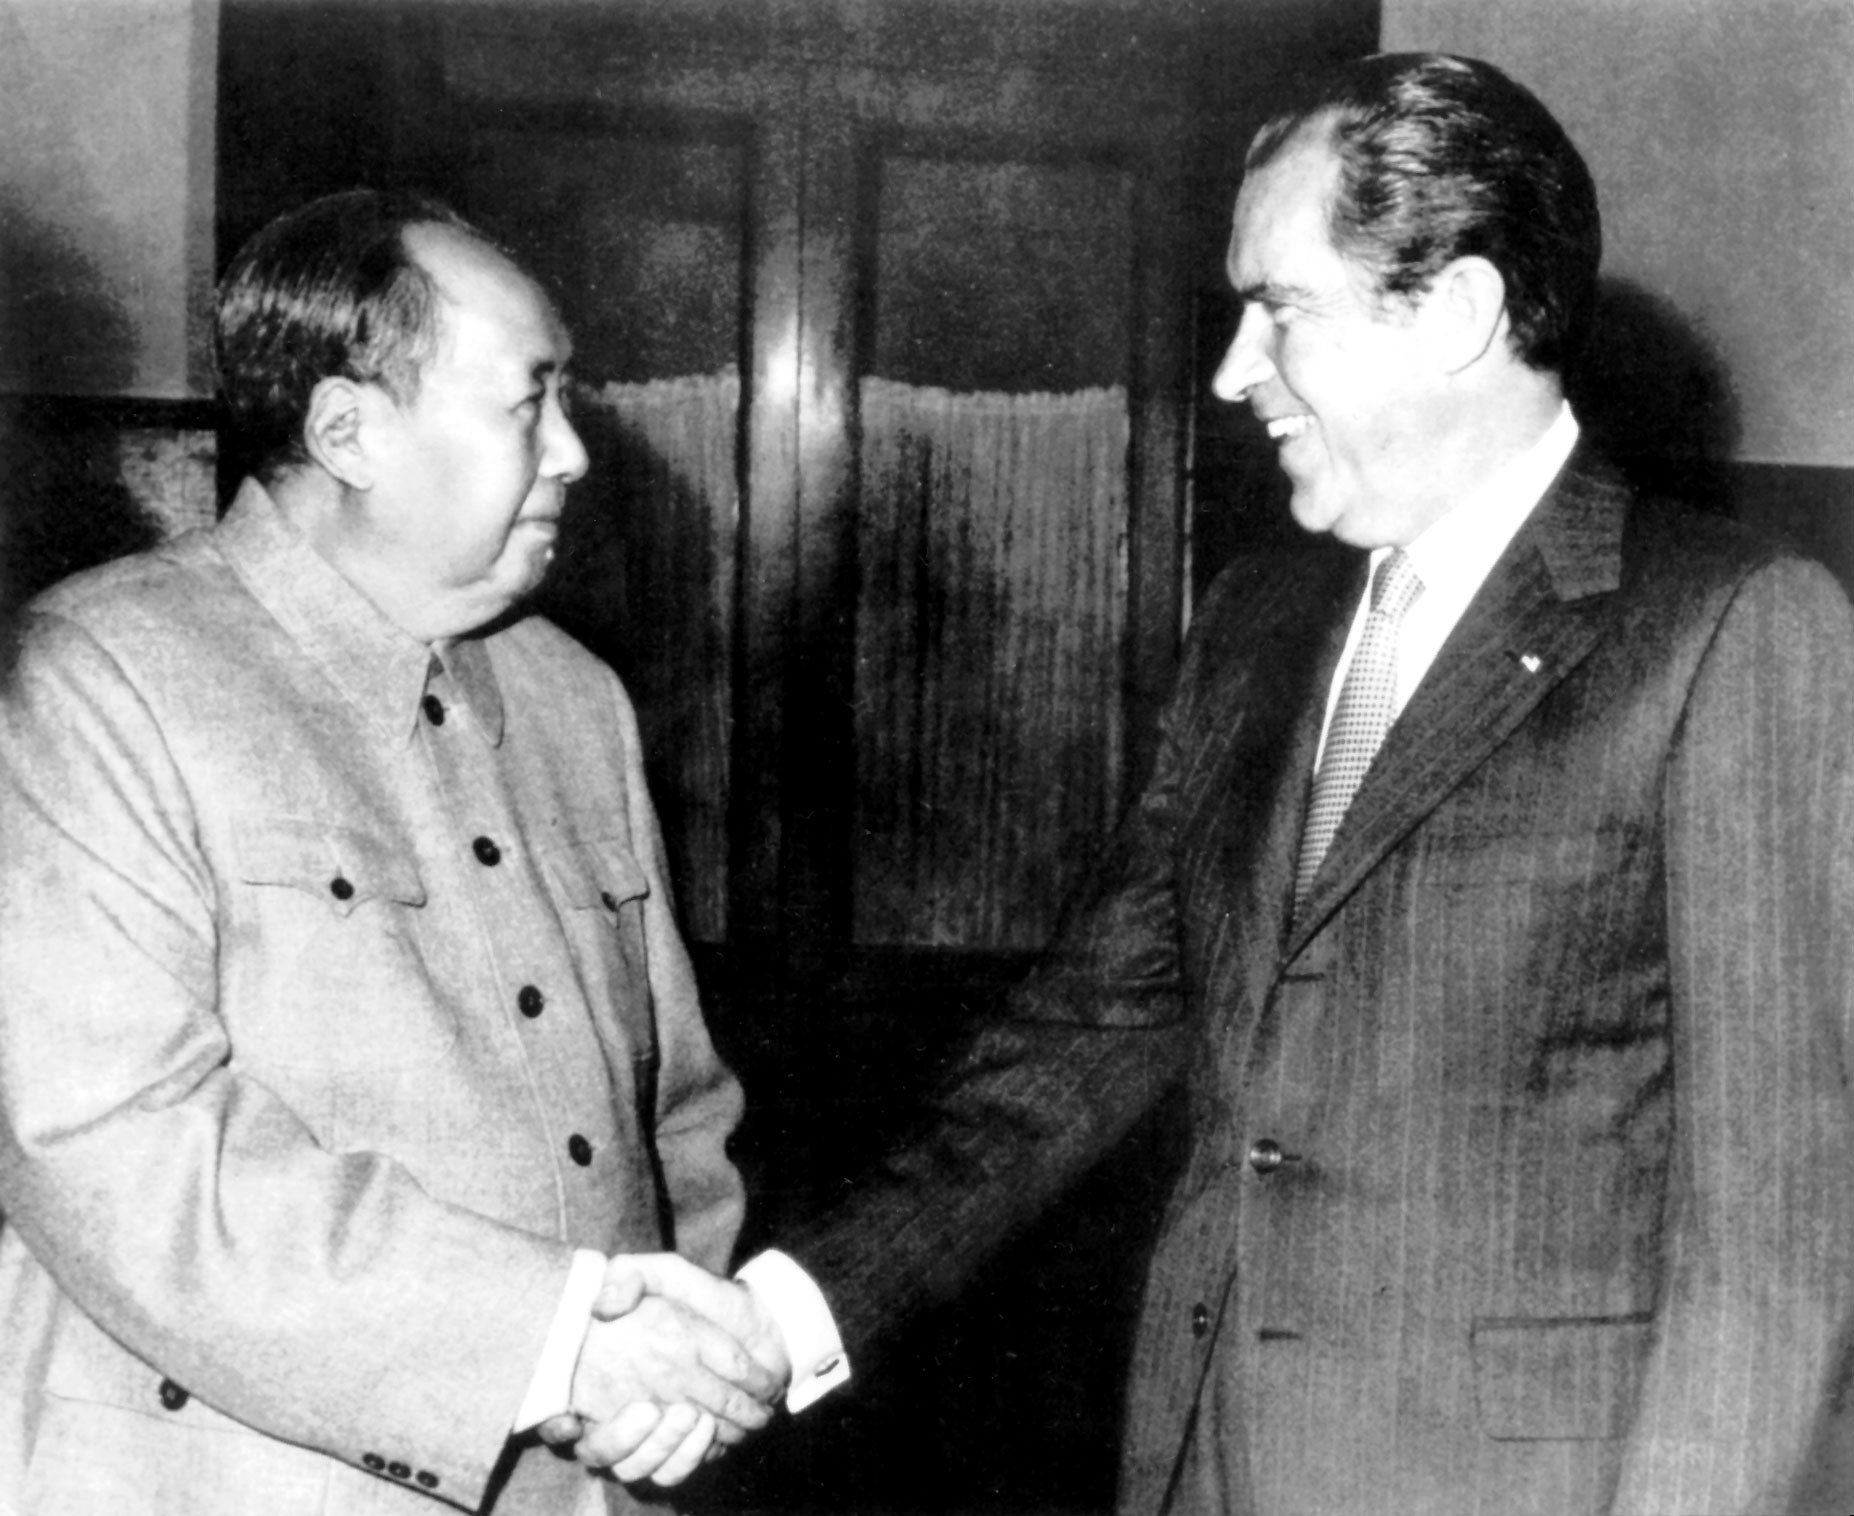 Over the past 45 years the leaders of China and the United States have met on dozens of occasions, but it all began in February 1972, when Chinese leader Mao Zedong (left) welcomed US President Richard Nixon to Beijing. Photo: Xinhua